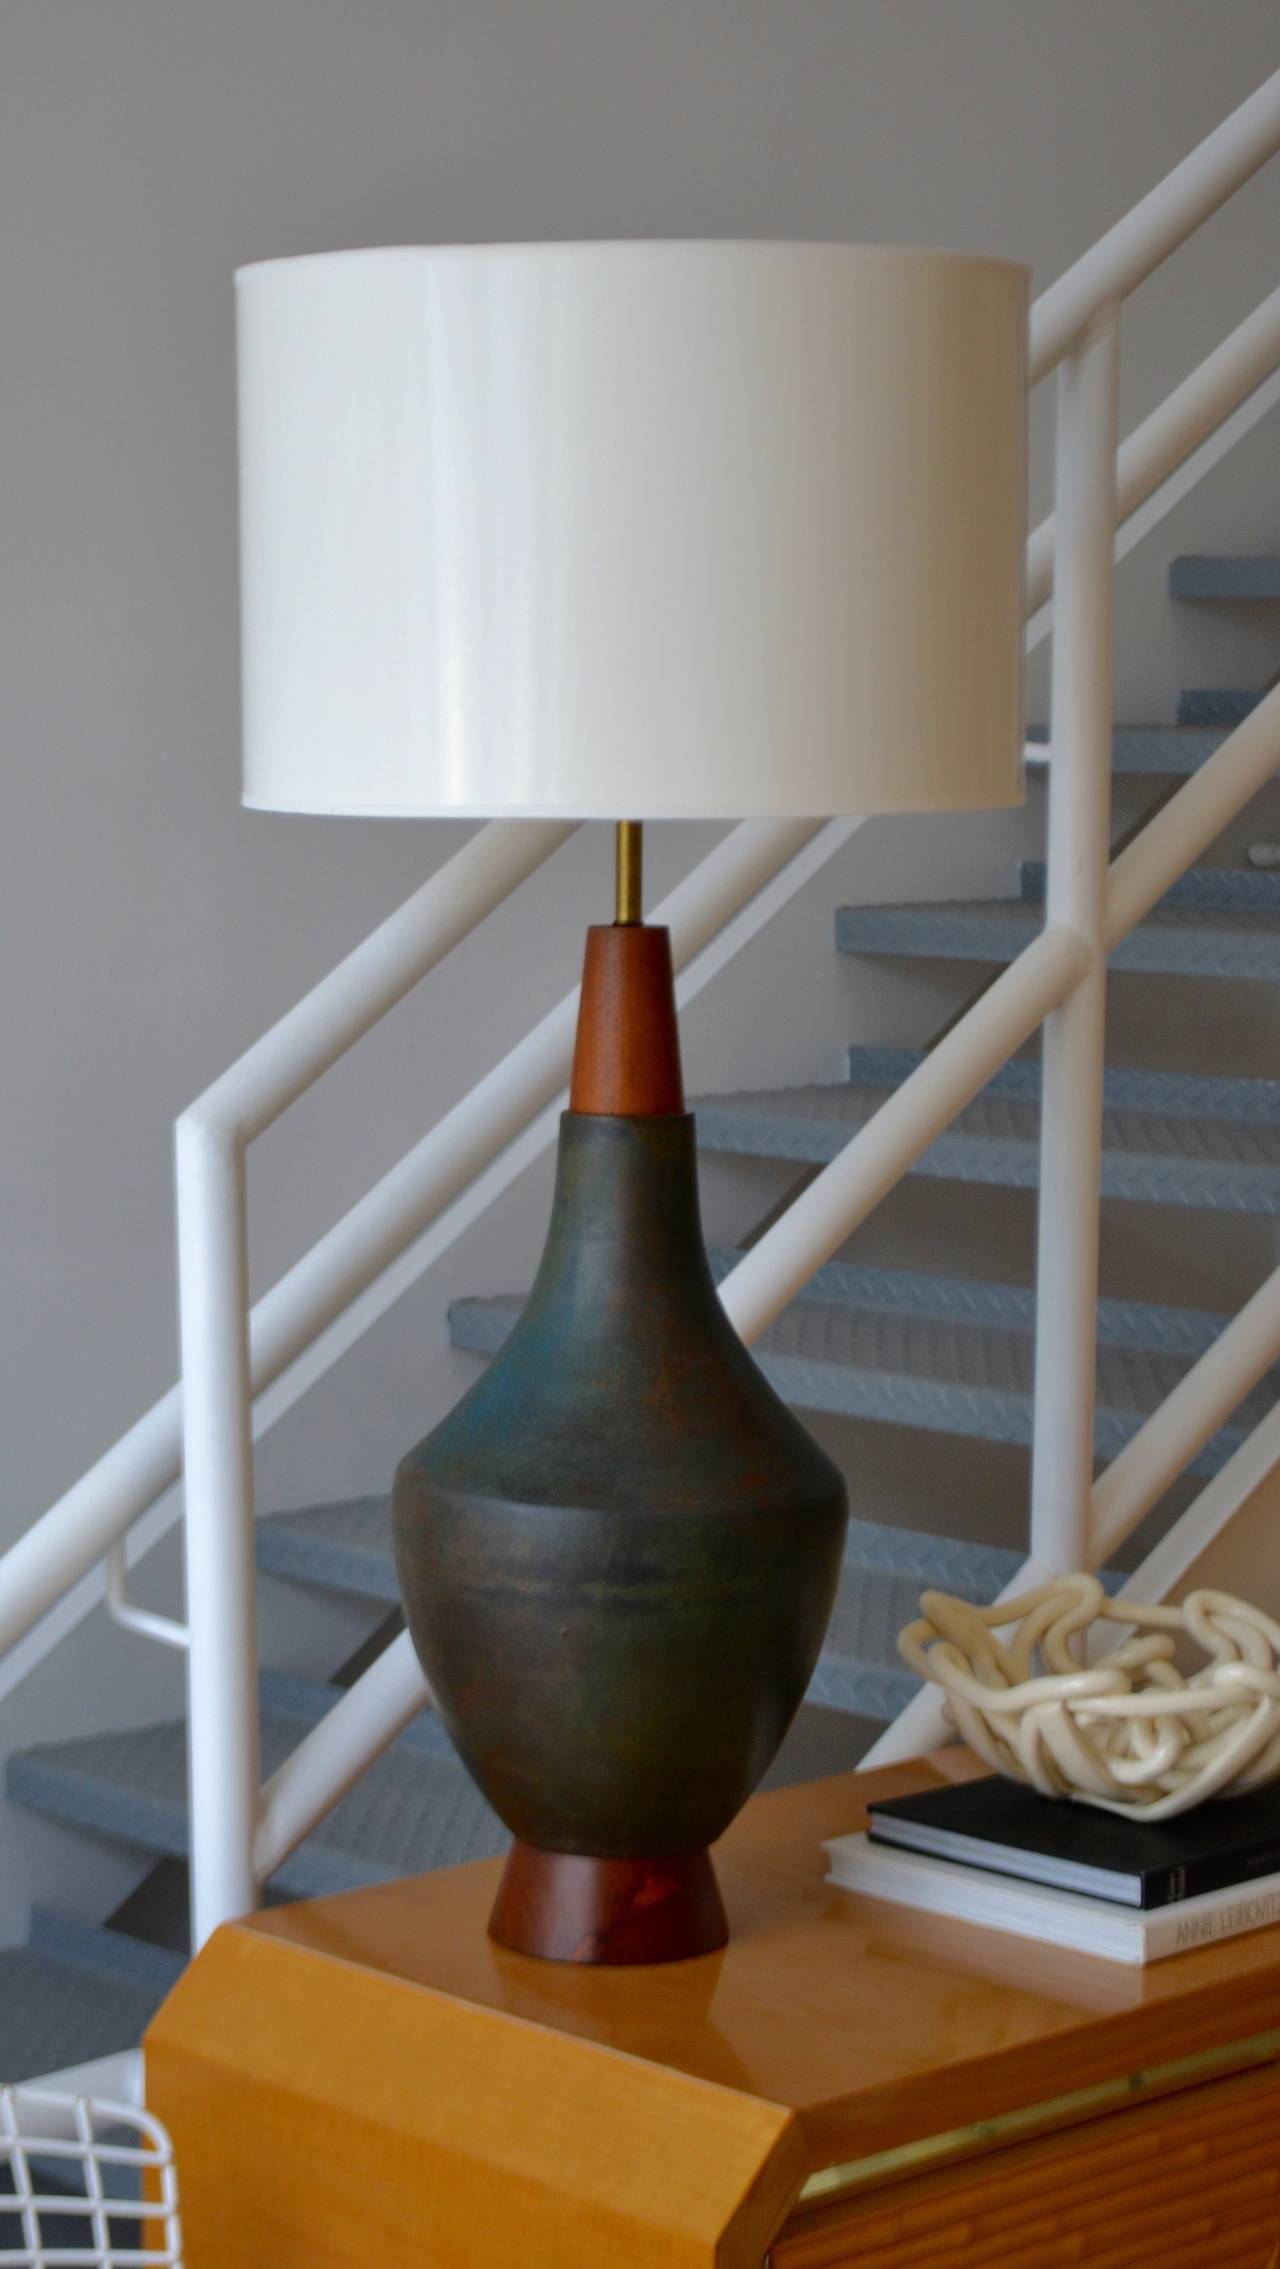 Mid Century Modern ceramic table lamp, c. 1950s - 1960s. Stunning craftsmanship with deep variegated glazing of green, umber, grey and black. The teak base and cap have been artistically turned and honed.
Shade not included. 

Overall